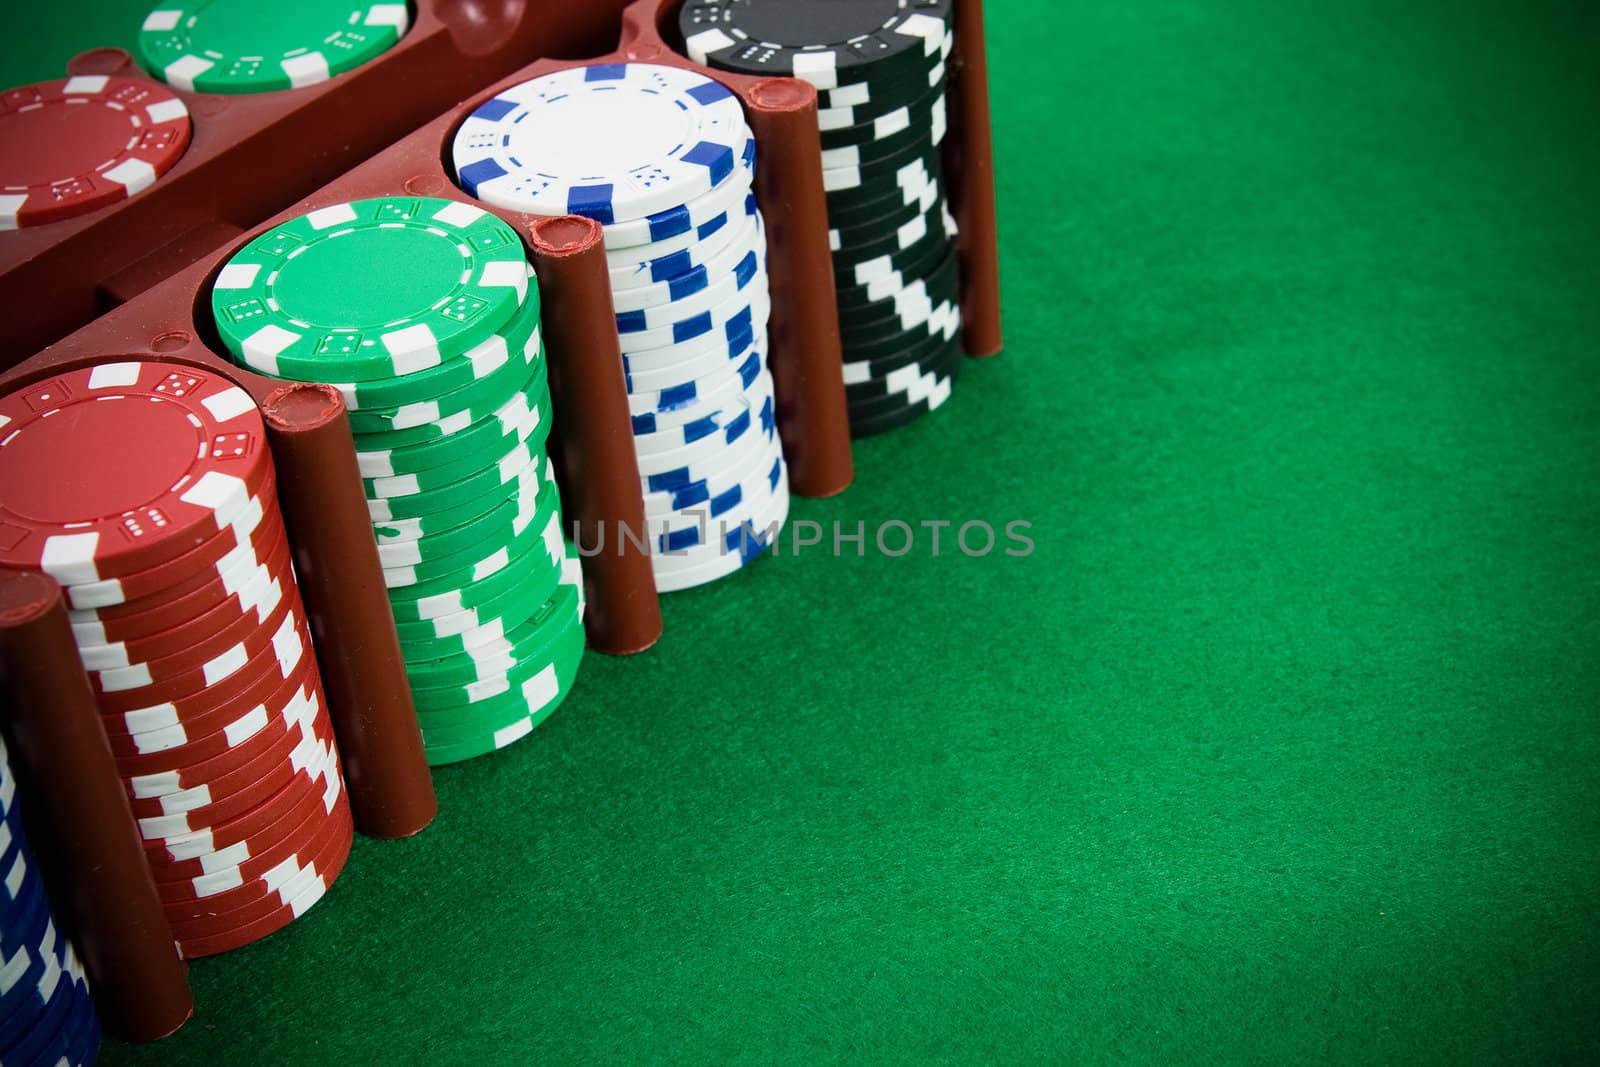 Poker chips in a box on green poker table.